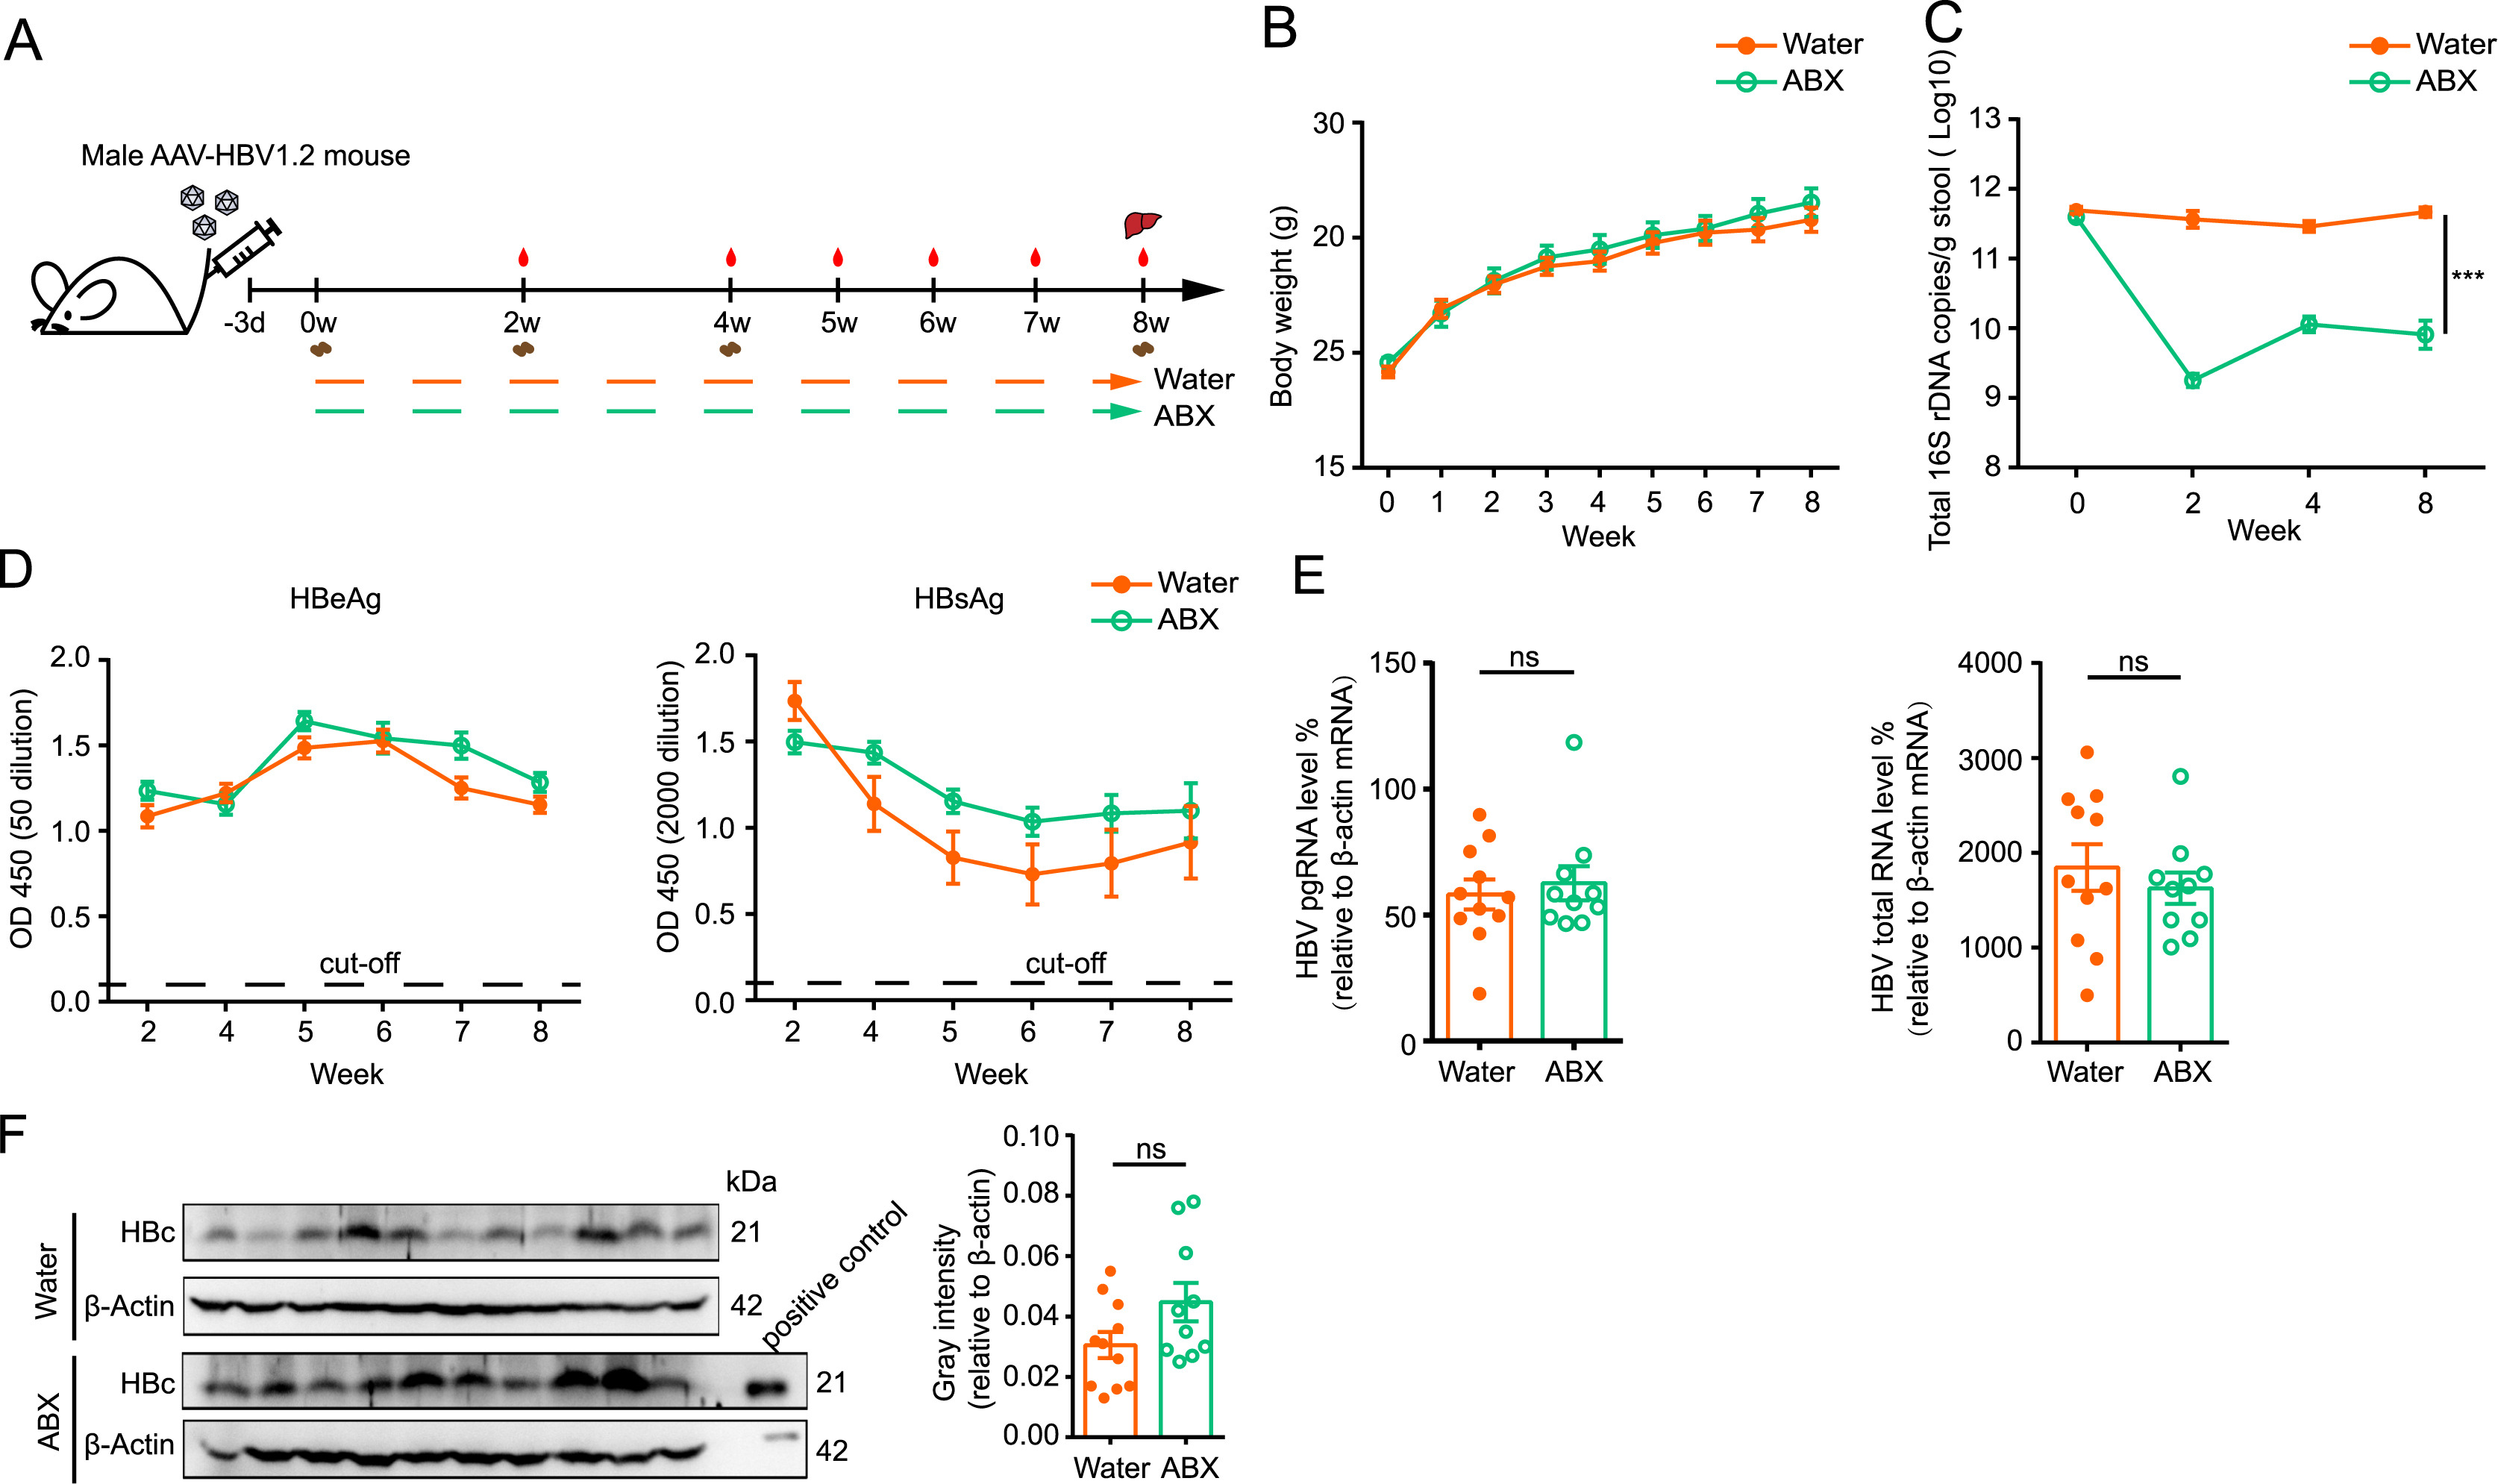 Antibiotic-induced gut bacteria depletion has no effect on HBV replication in HBV immune tolerance mouse model